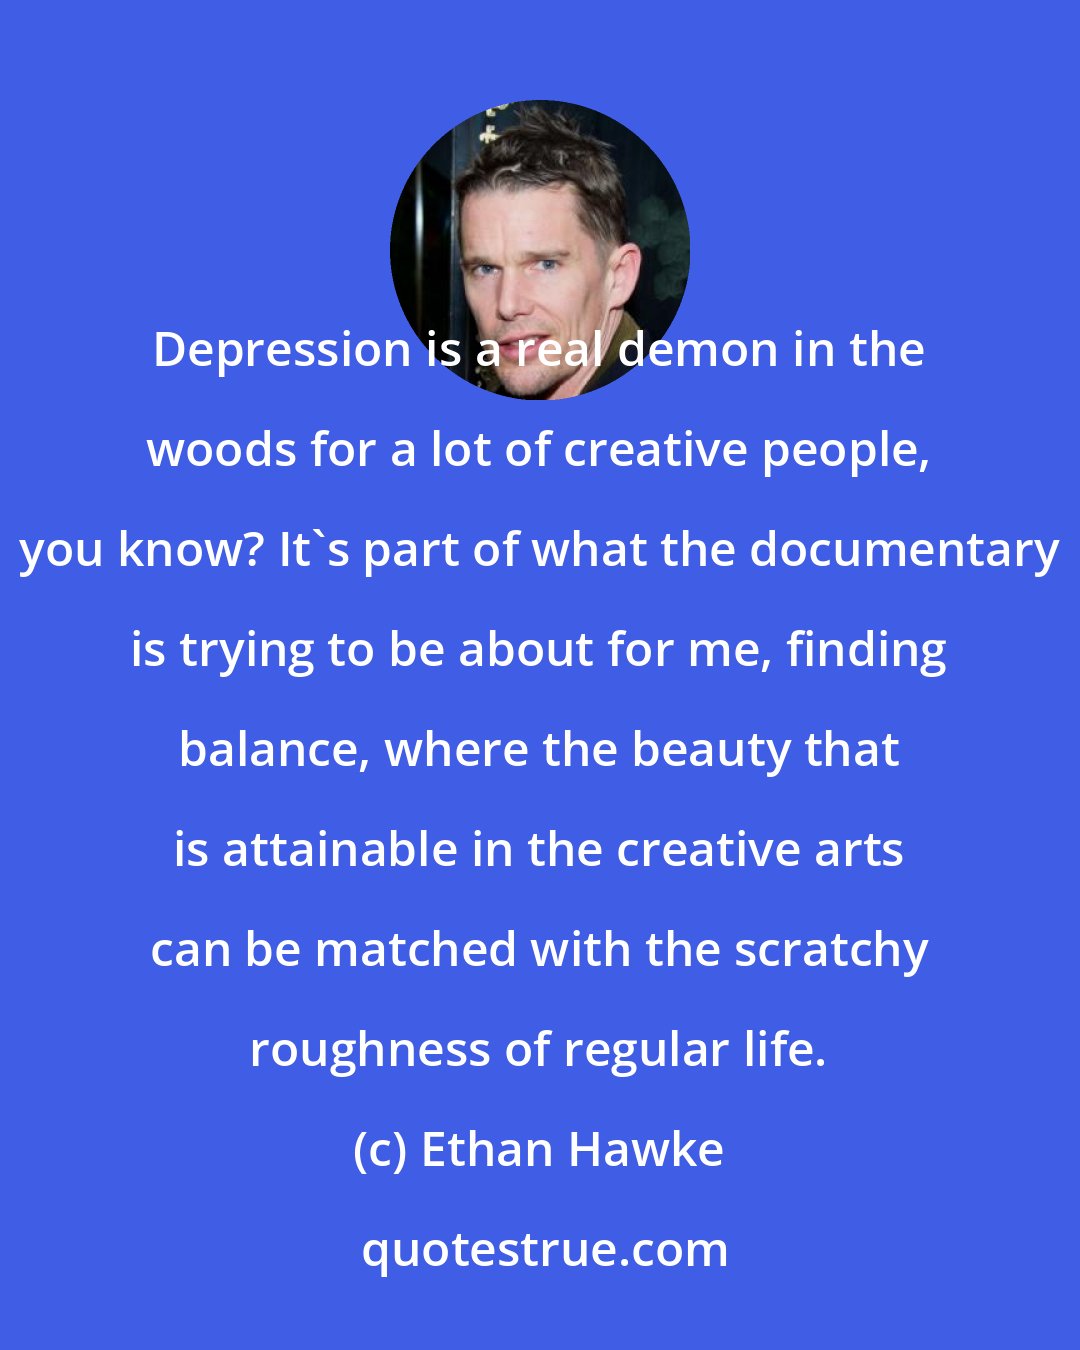 Ethan Hawke: Depression is a real demon in the woods for a lot of creative people, you know? It's part of what the documentary is trying to be about for me, finding balance, where the beauty that is attainable in the creative arts can be matched with the scratchy roughness of regular life.